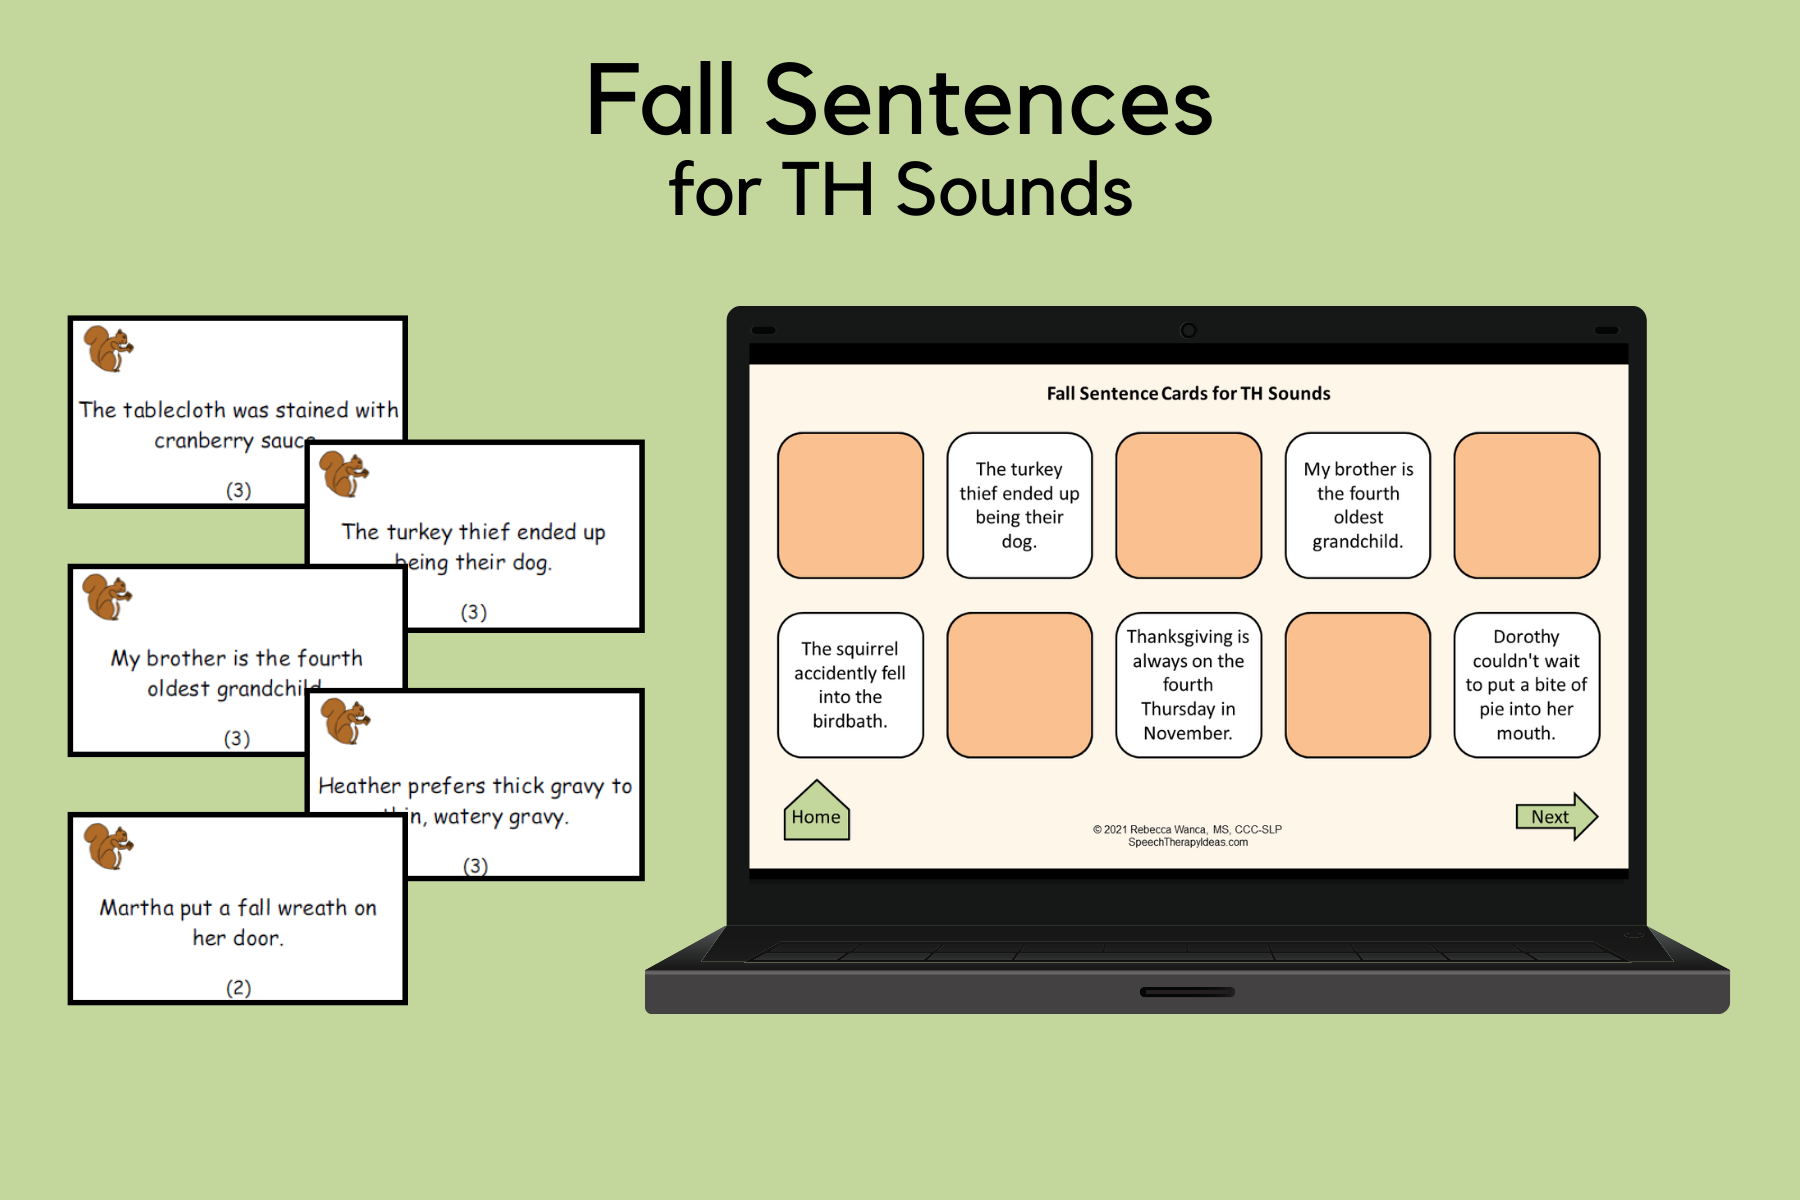 Fall Sentences for TH Sounds